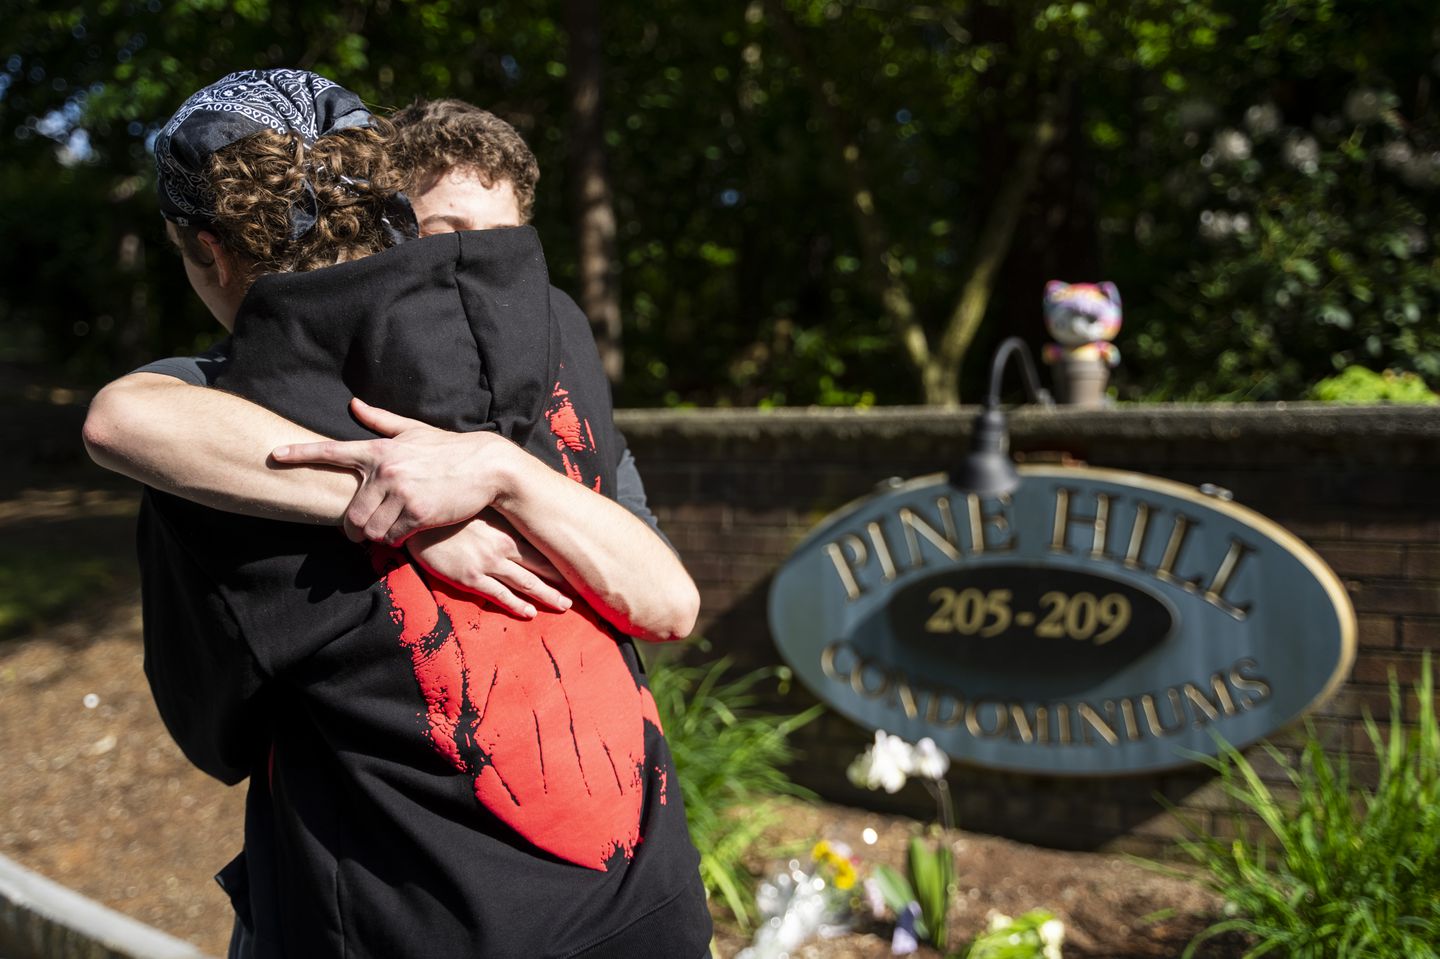 Tenth-graders Ben Stimac and Colin Beers-Murphy embraced on May 5 at the memorial site Beers-Murphy created for their classmate who died in a murder-suicide. She was killed by her stepfather, Juliano Santana, the previous day. Santana was charged in 2021 for raping his stepdaughter and she had an active restraining order against him.